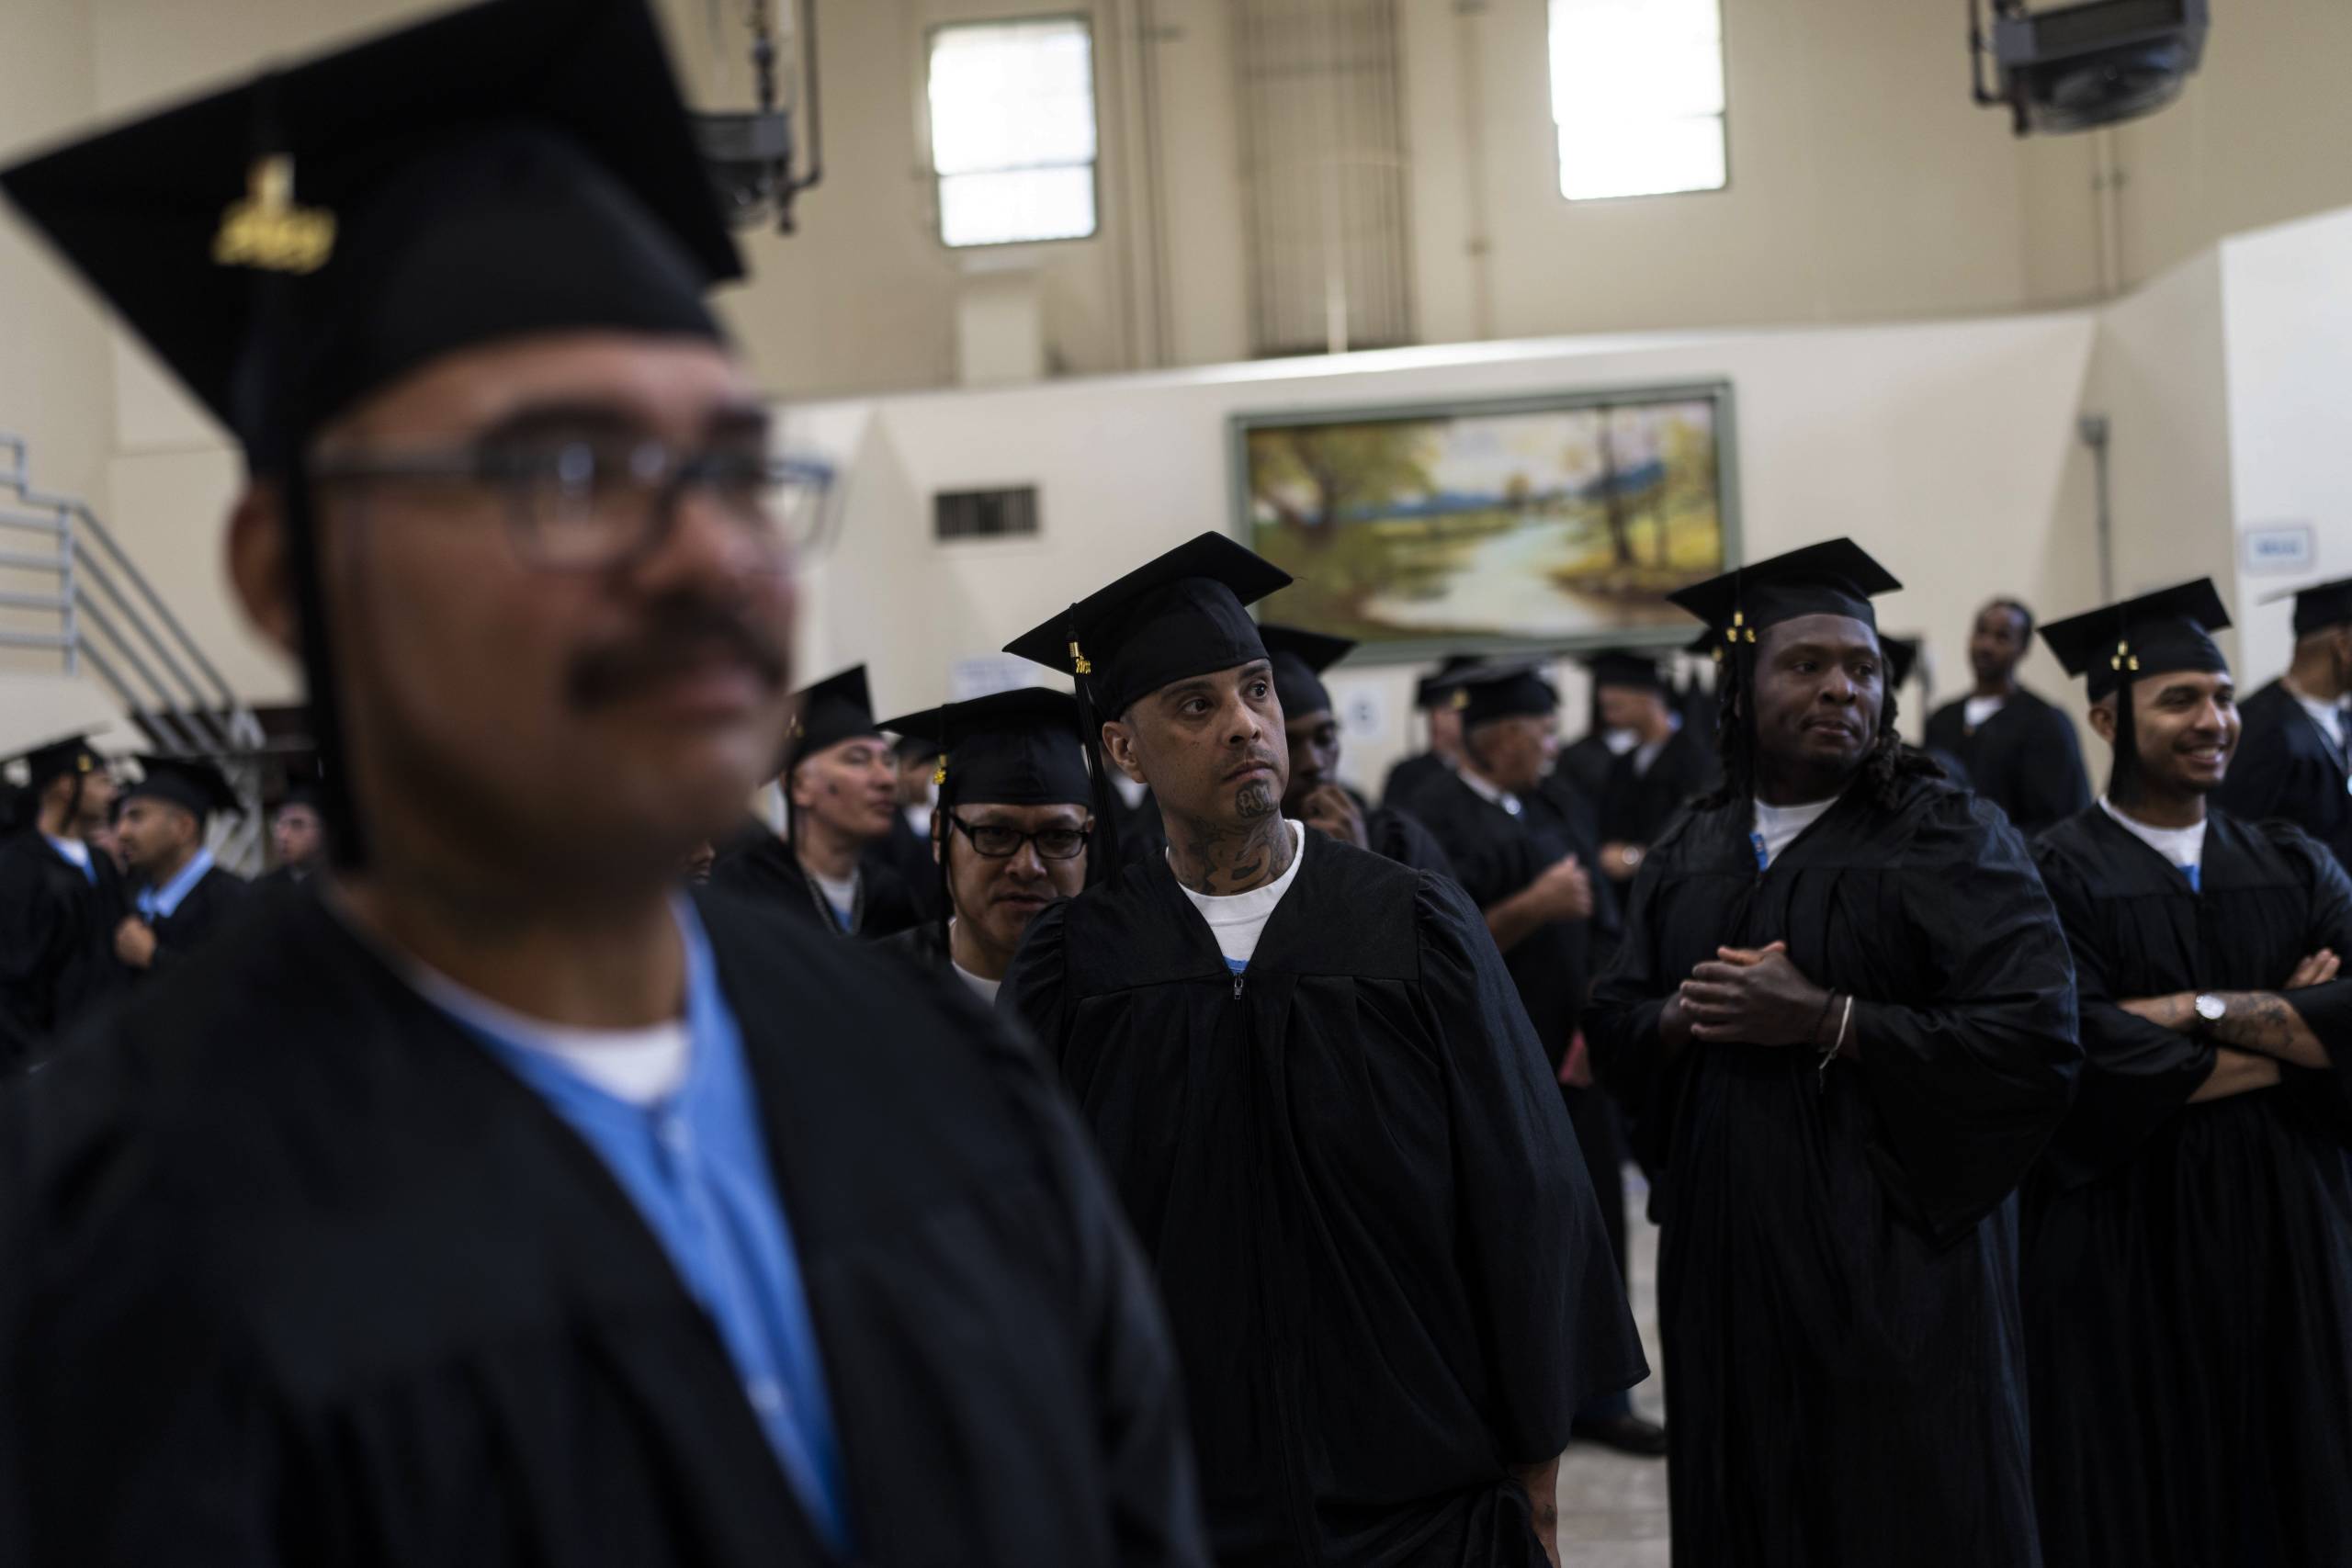 A group of men of mixed ages, wearing graduation caps and gowns on top of blue prison gowns, gather in a large room.